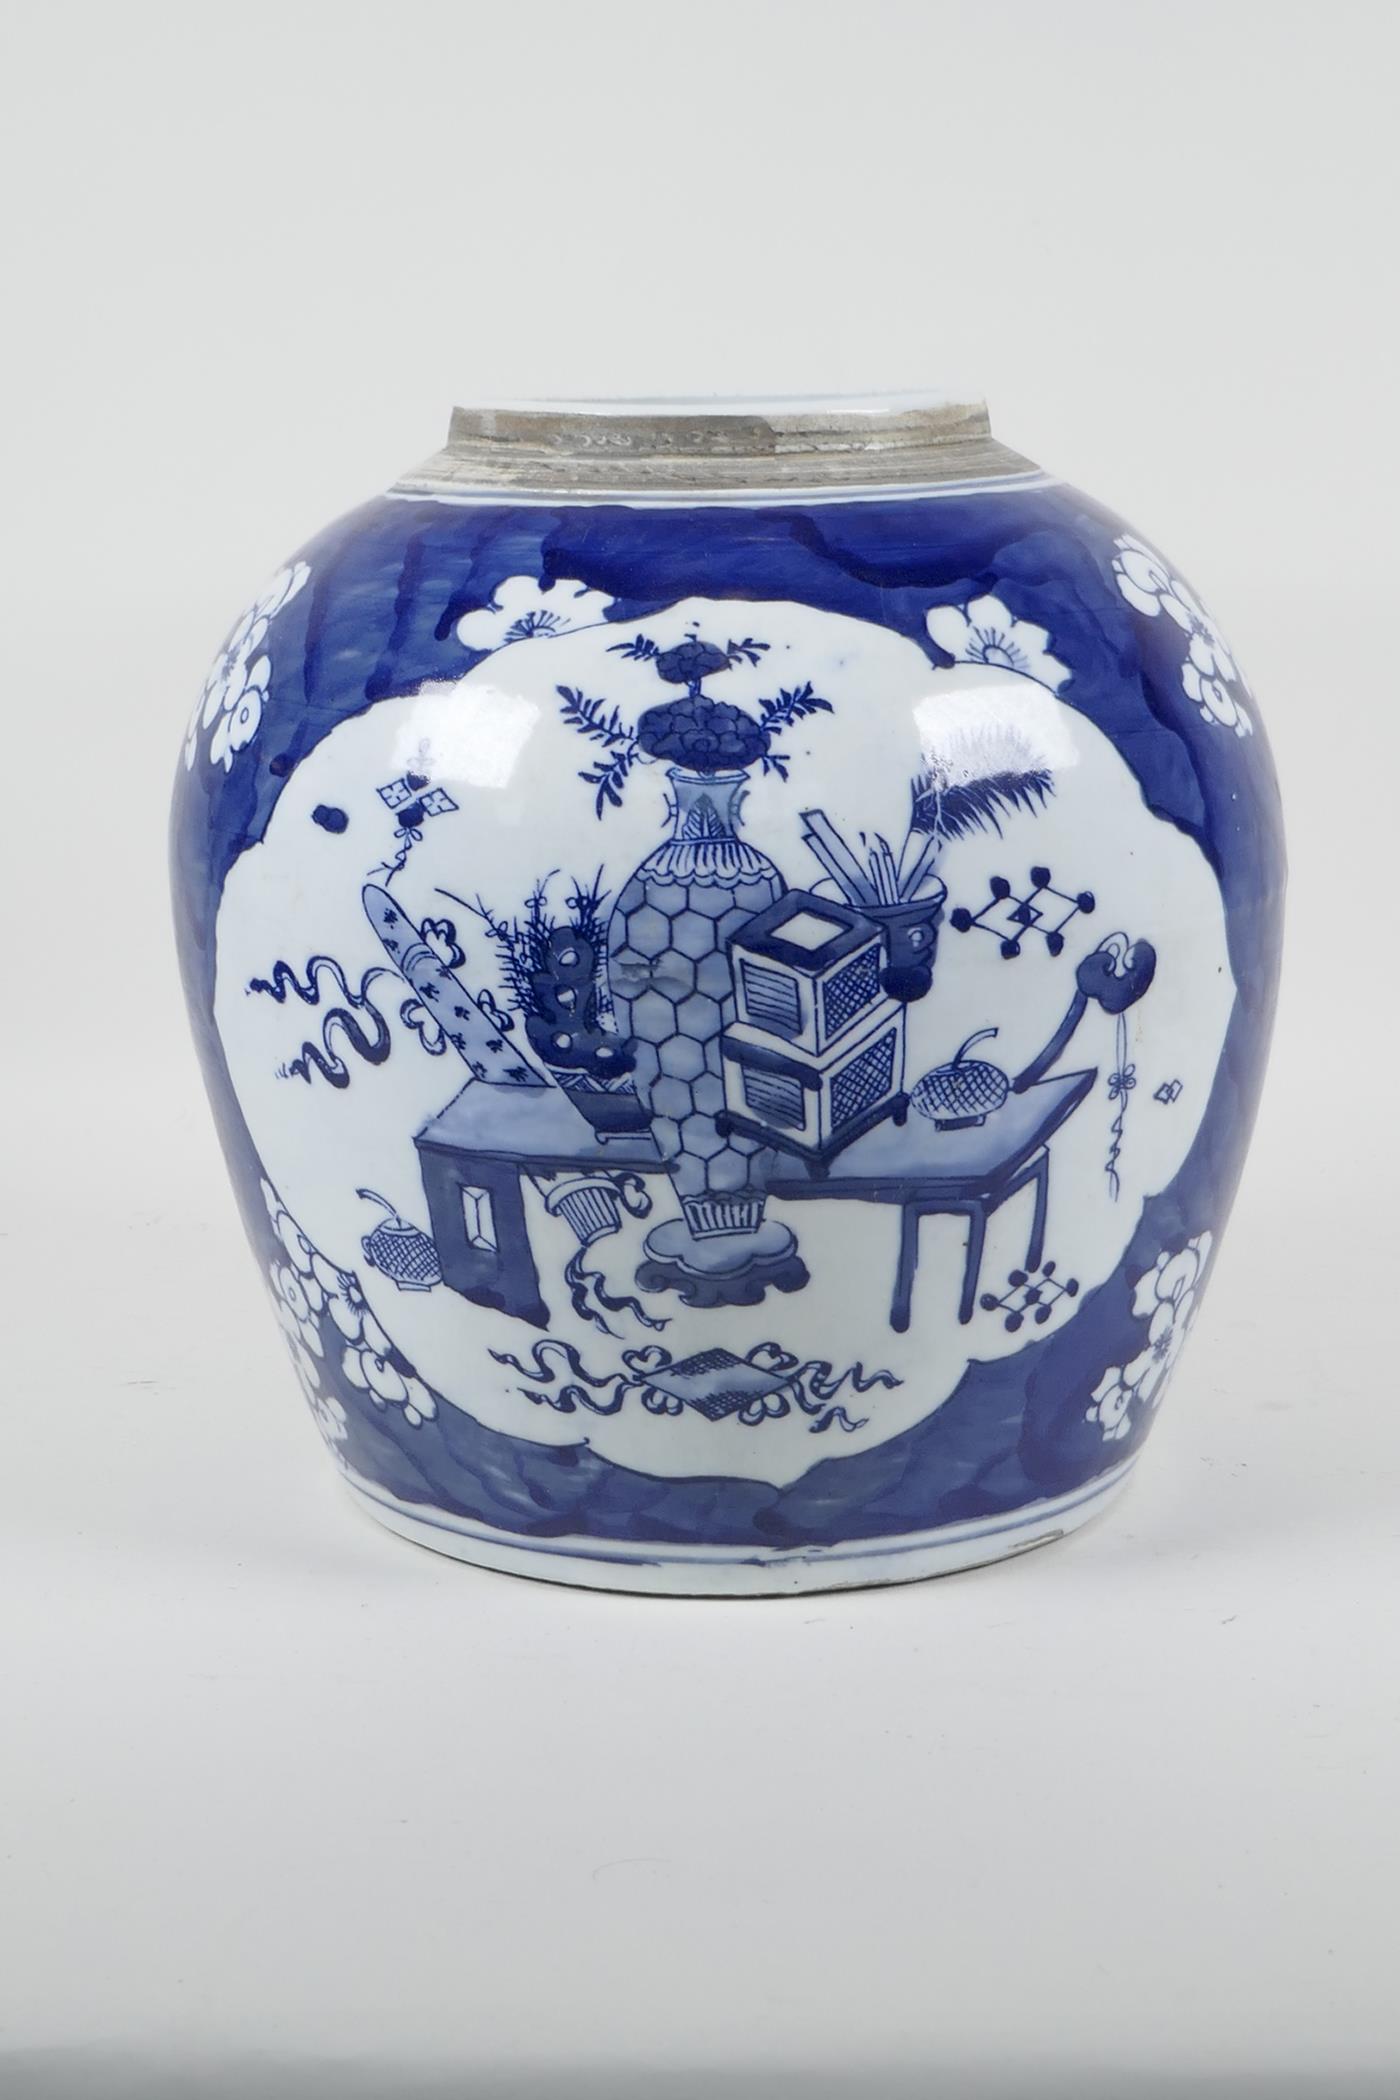 An early C20th Chinese blue and white porcelain jar with decorative panels depicting objects of - Image 2 of 3